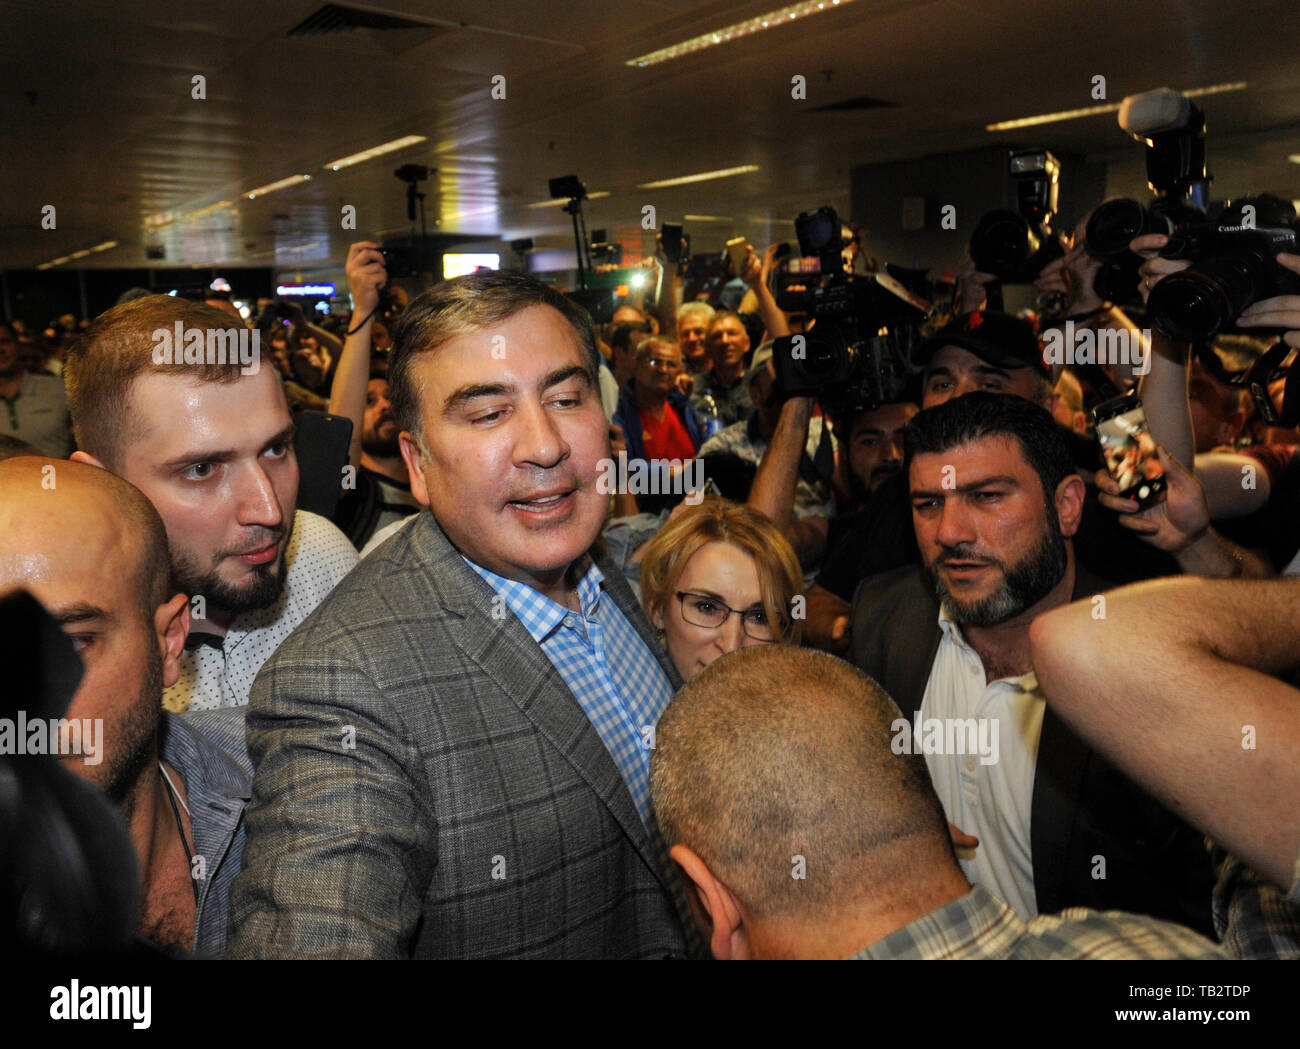 Former Georgian president Mikheil Saakashvili seen being welcomed by his supporters after returning to Ukraine at Boryspil airport in Kiev.  President Volodymyr Zelensky restored Mikheil Saakashvili’s Ukrainian citizenship after he was stripped by a decree of former Ukraine's president Petro Poroshenko in July 2017. Stock Photo